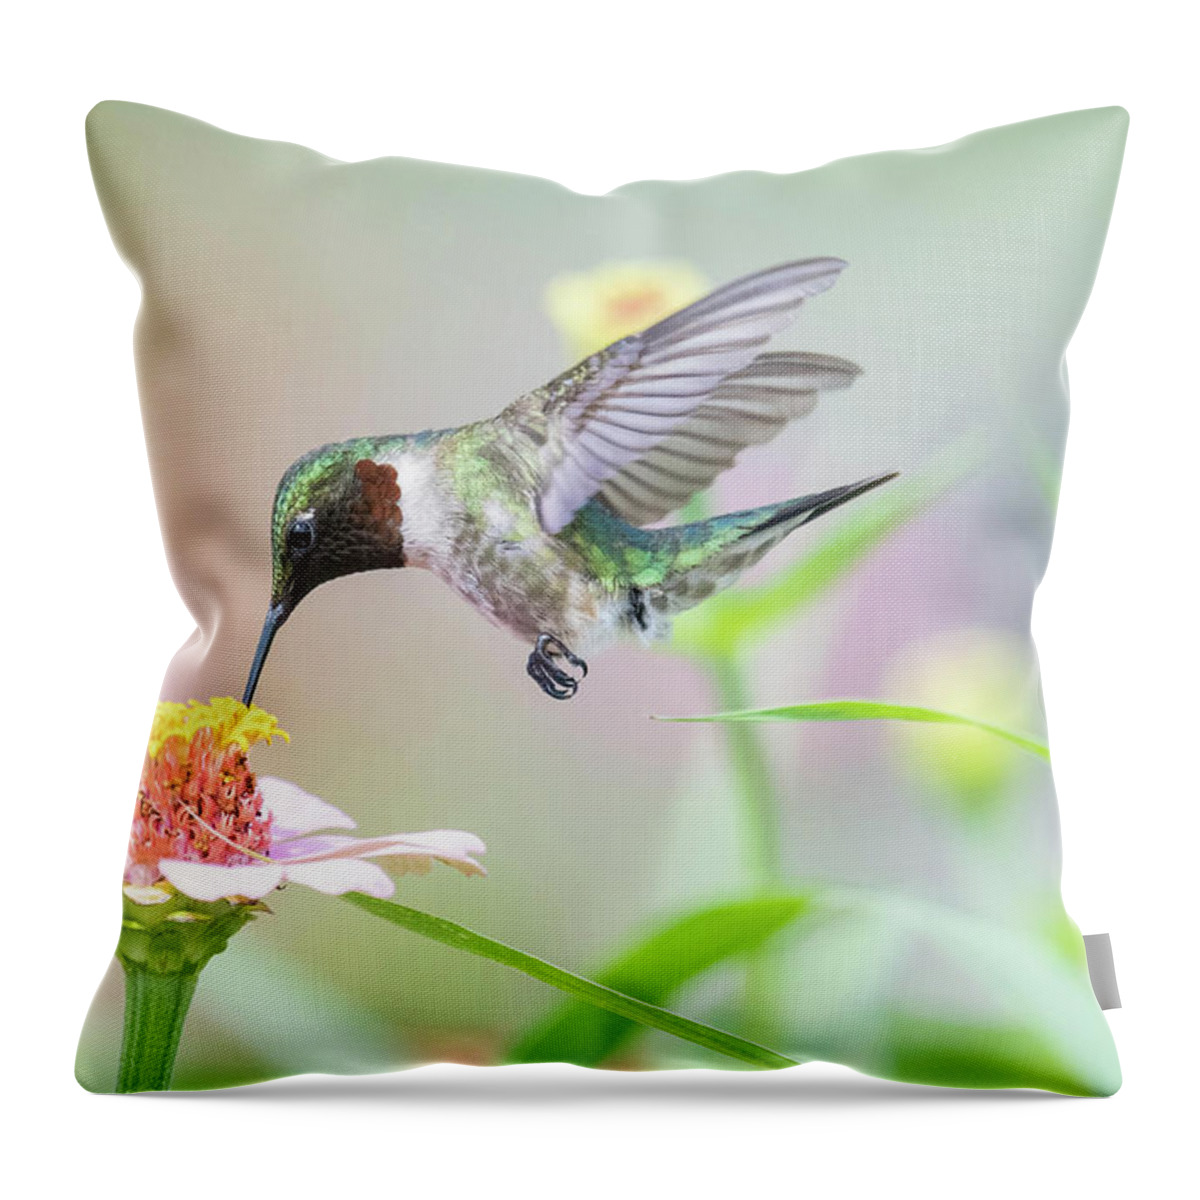 Ruby Throated Hummingbird Throw Pillow featuring the photograph Feathered Fancy by Linda Shannon Morgan